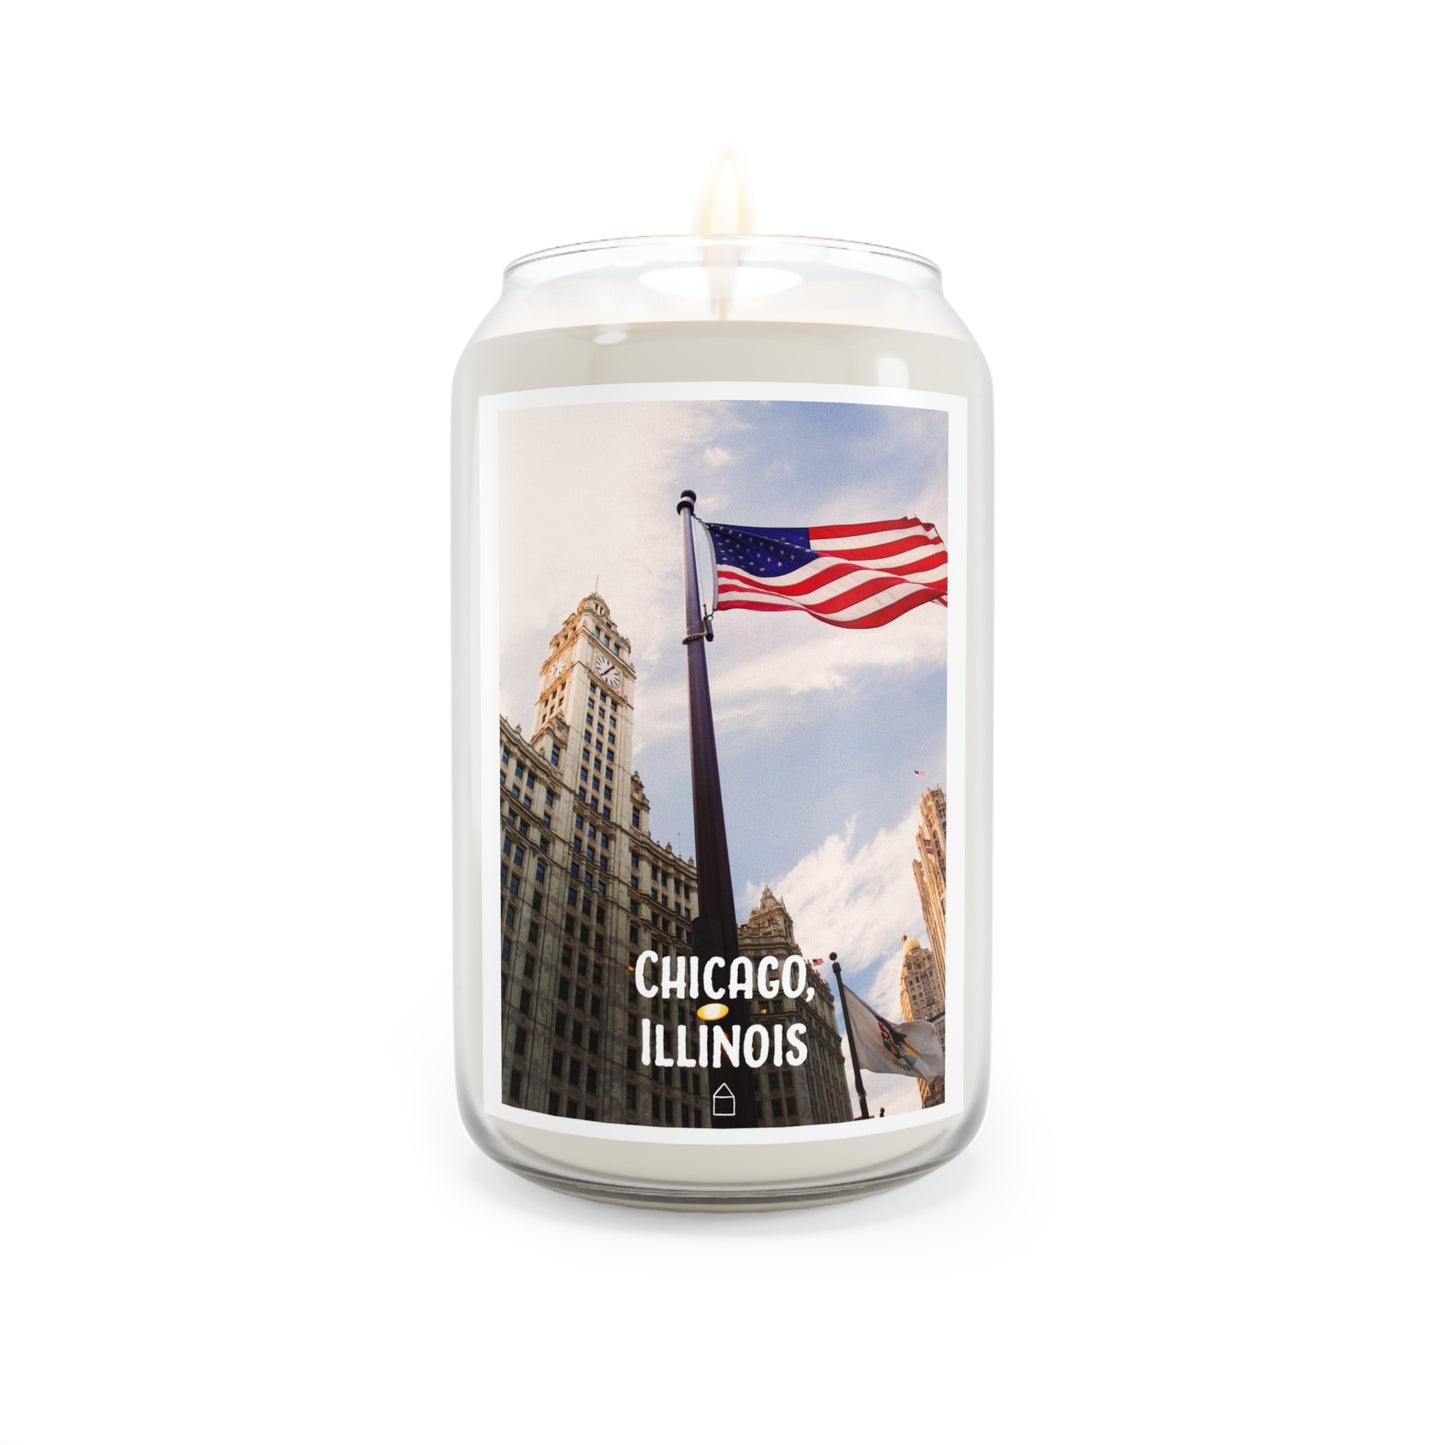 Chicago, Illinois (#010) - Home Town Candles, 13.75oz